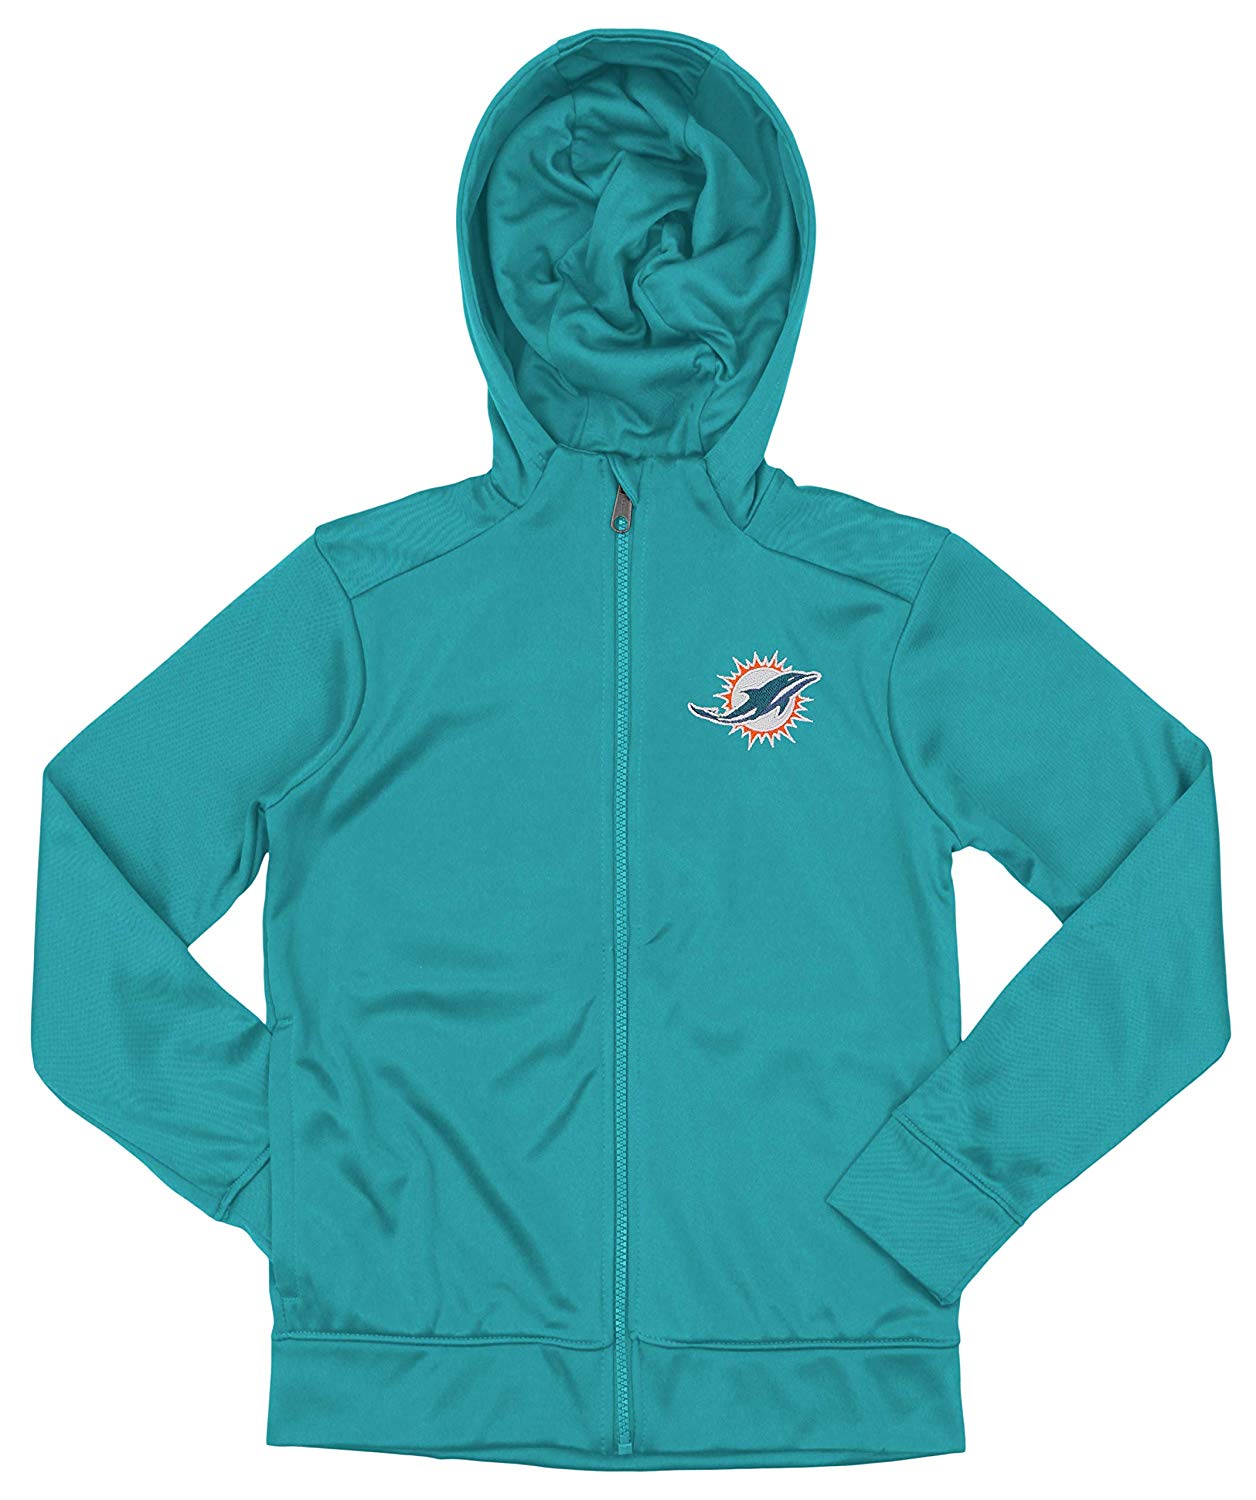 Outerstuff NFL Youth/Kids Miami Dolphins Performance Full Zip Hoodie | eBay